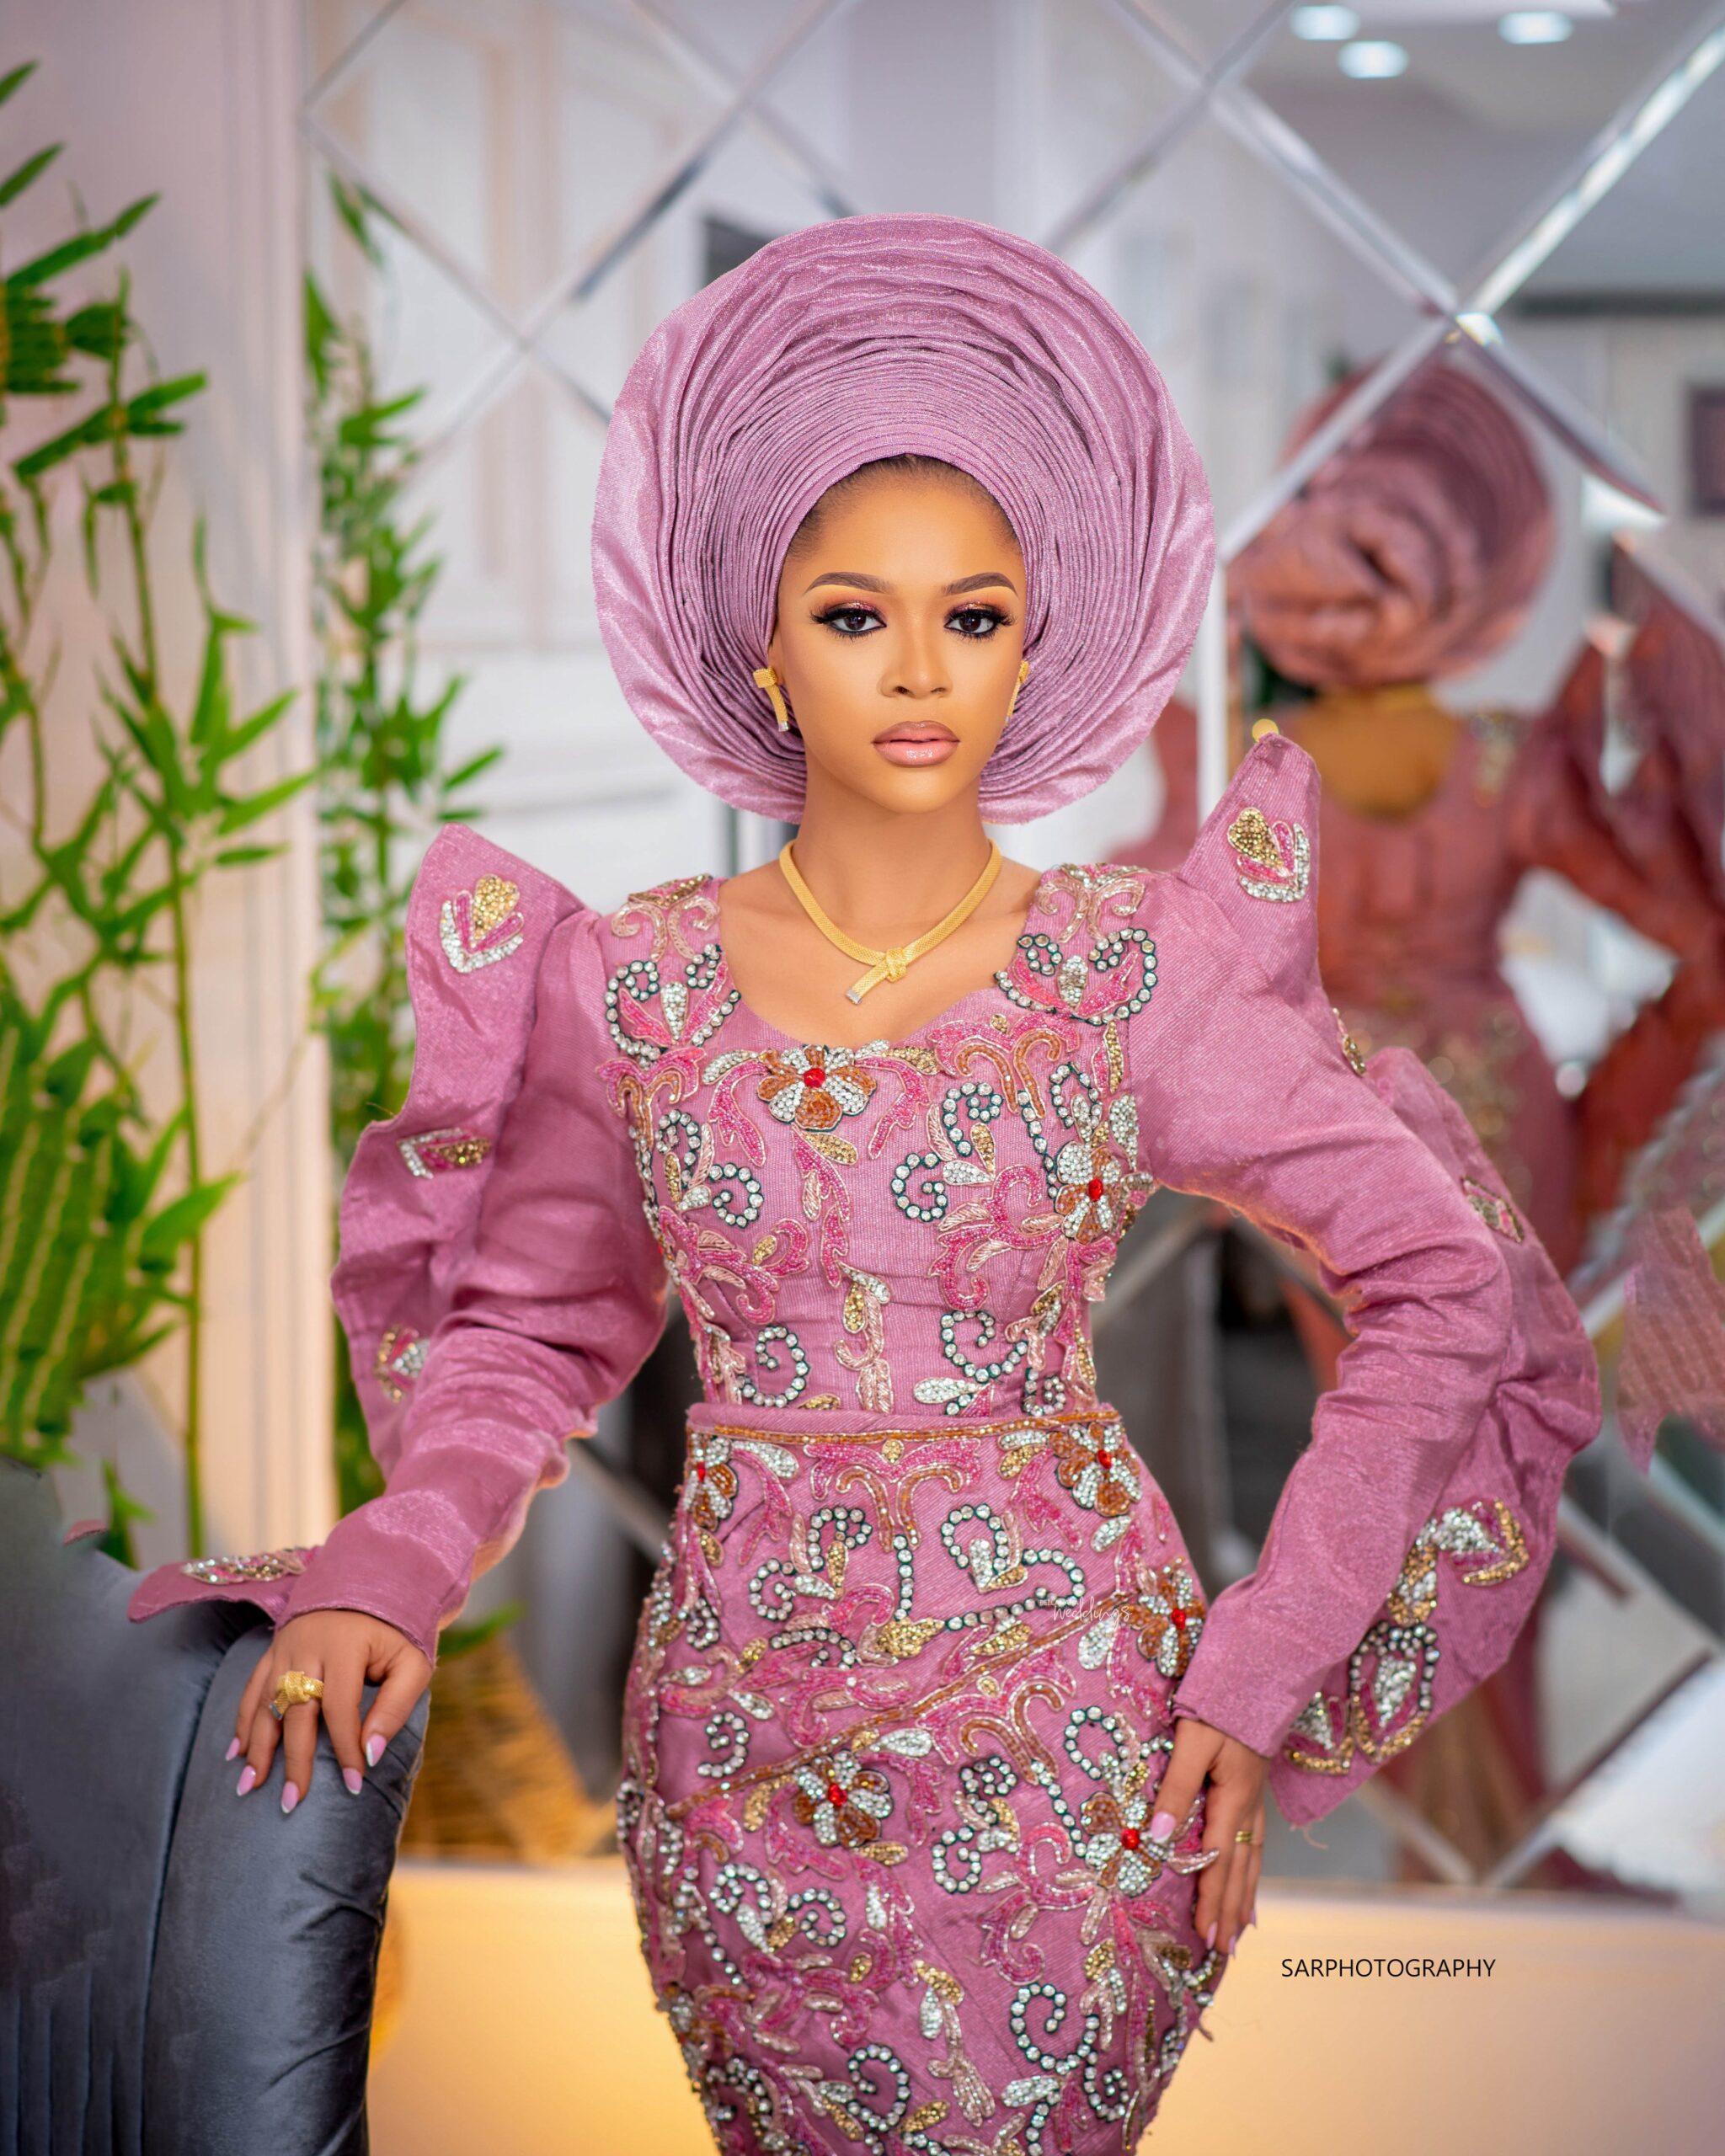 This Pink Asooke Reflects The Style & Elegance of a Yoruba Bride